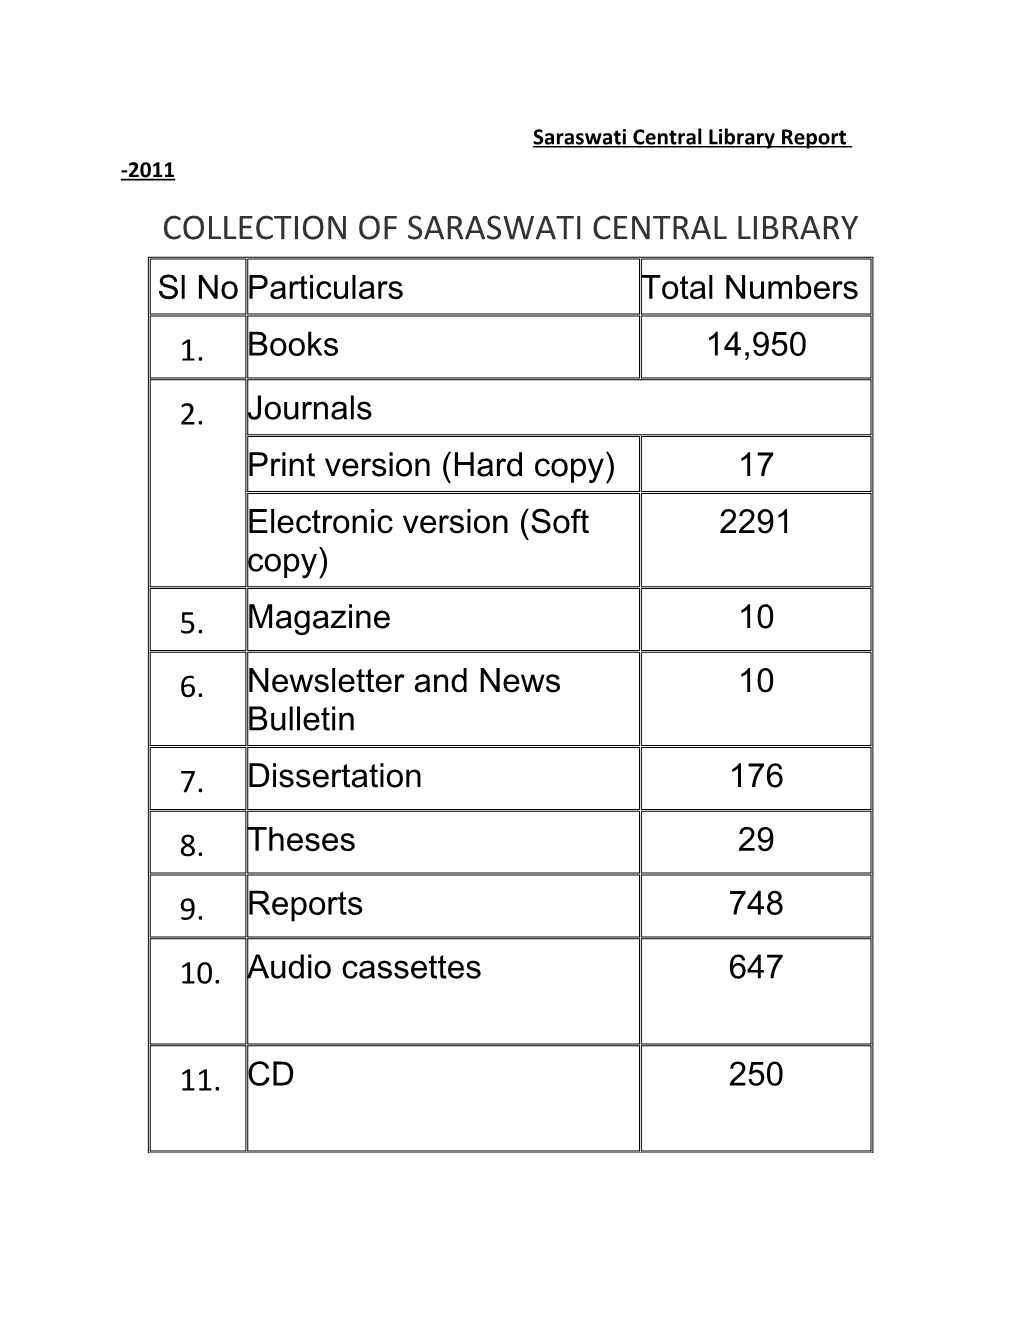 Collection of Saraswati Central Library